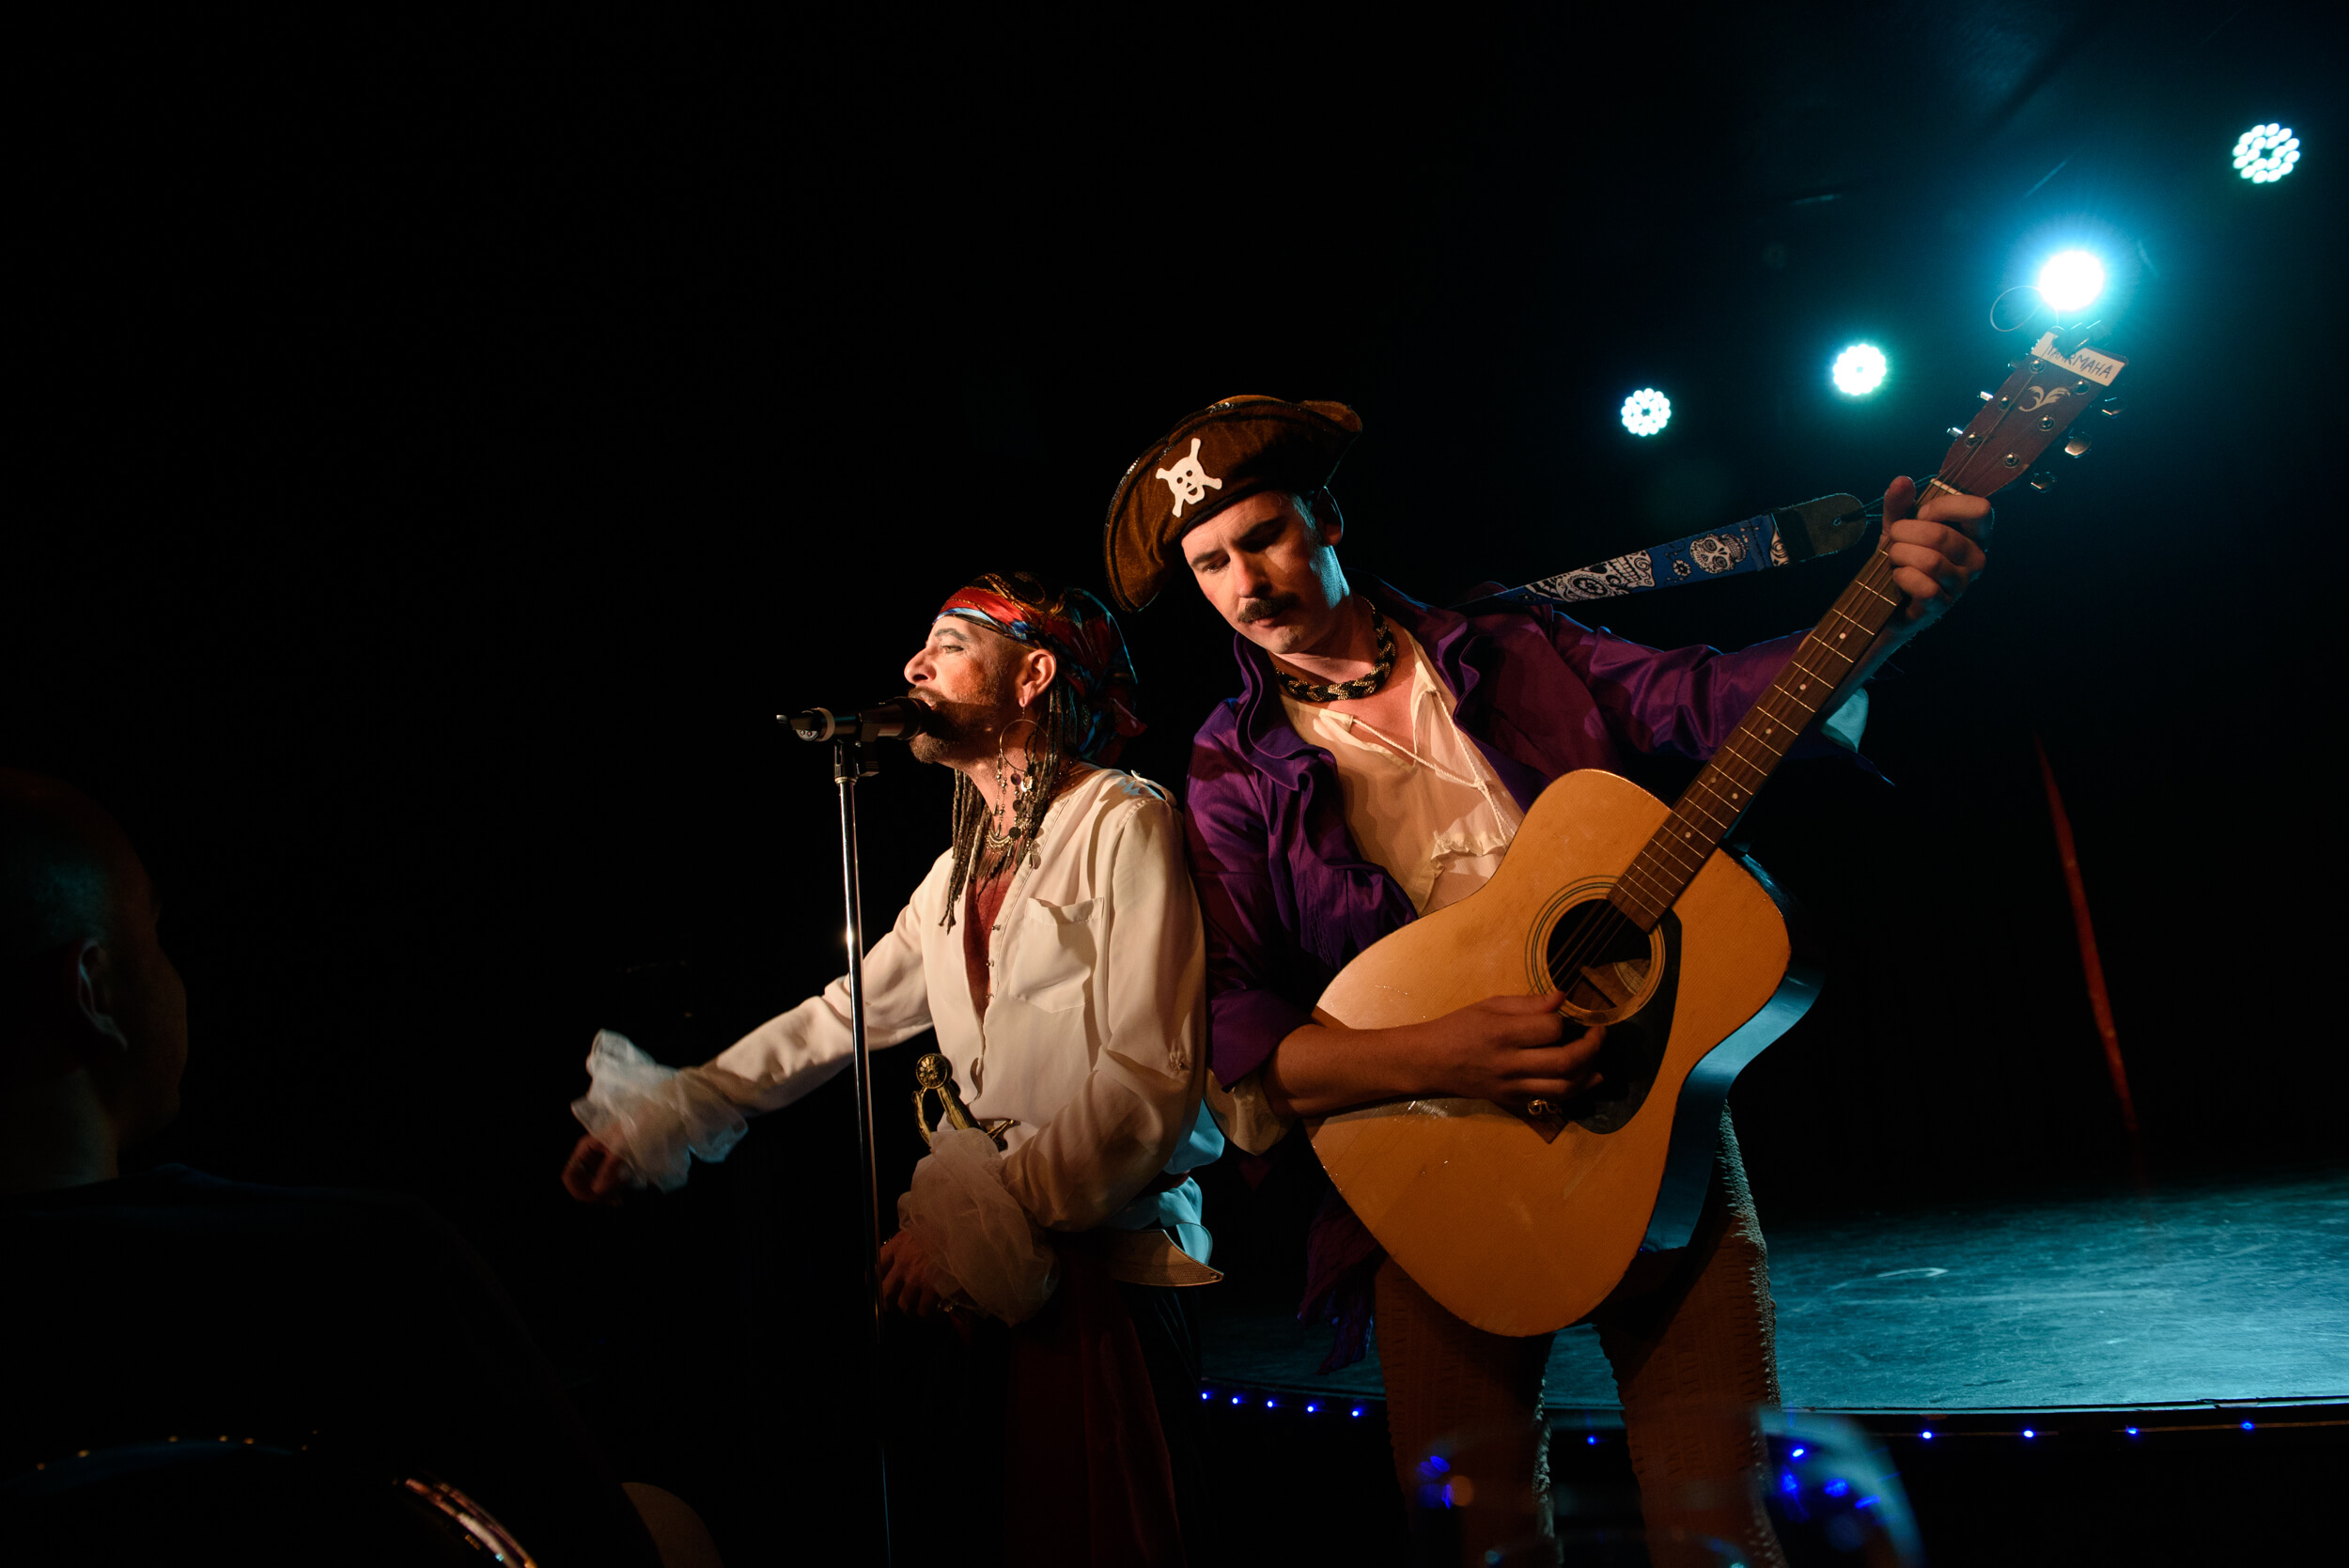 2 performers dressed as pirates stand shoulder to shoulder. One is singing into a microphone, the other is playing a guitar.